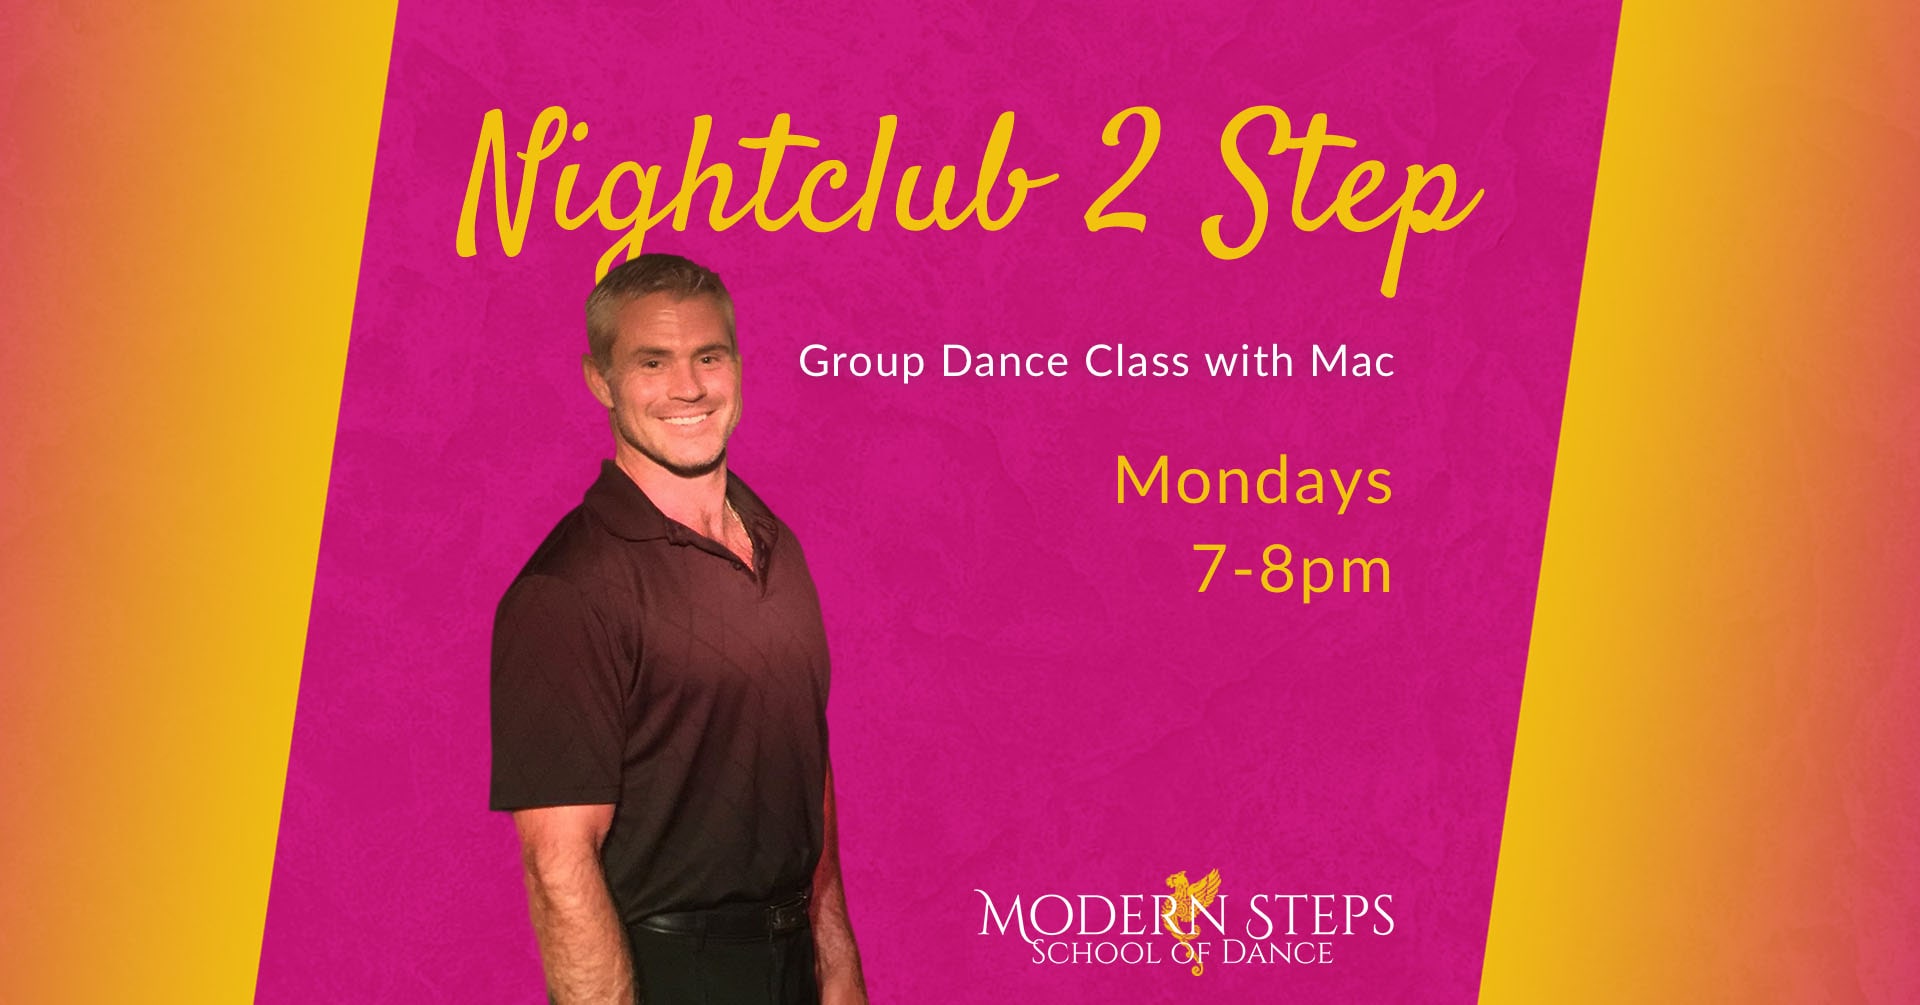 Nightclub Slow 2-Step group dance classes with Mac at Modern Steps Dance Studio in Naples Florida